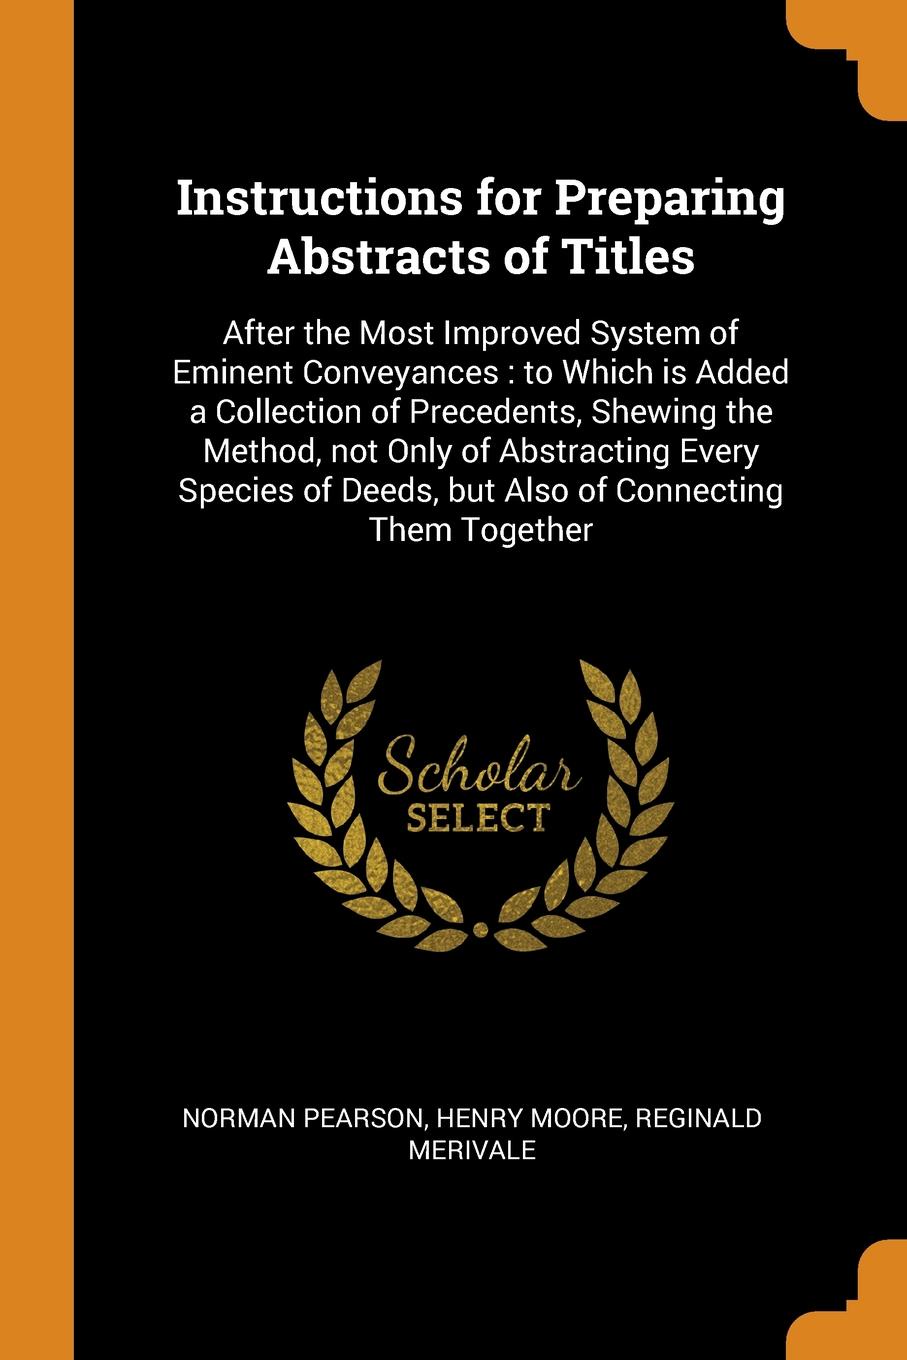 Instructions for Preparing Abstracts of Titles. After the Most Improved System of Eminent Conveyances : to Which is Added a Collection of Precedents, Shewing the Method, not Only of Abstracting Every Species of Deeds, but Also of Connecting Them T...